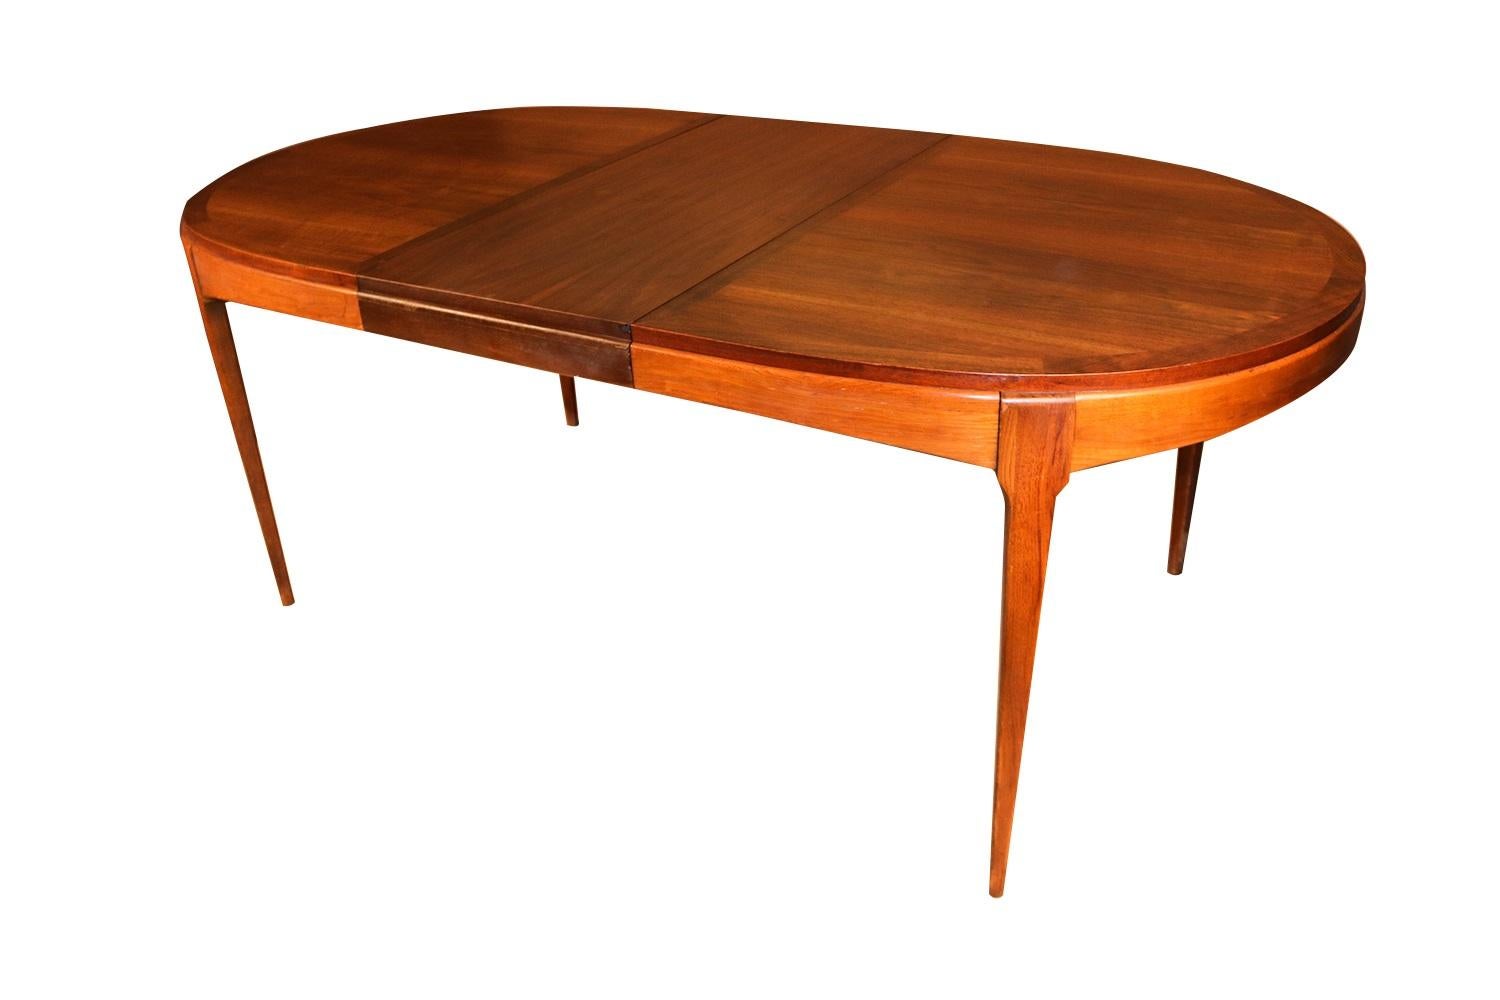 Beautiful Mid-Century Modern expandable, Lane First Edition dining table, manufactured by Lane. Features an oval shaped top accented with richly grained, walnut, clean lines characteristic of Classic Danish design. Raised over four tapered legs,